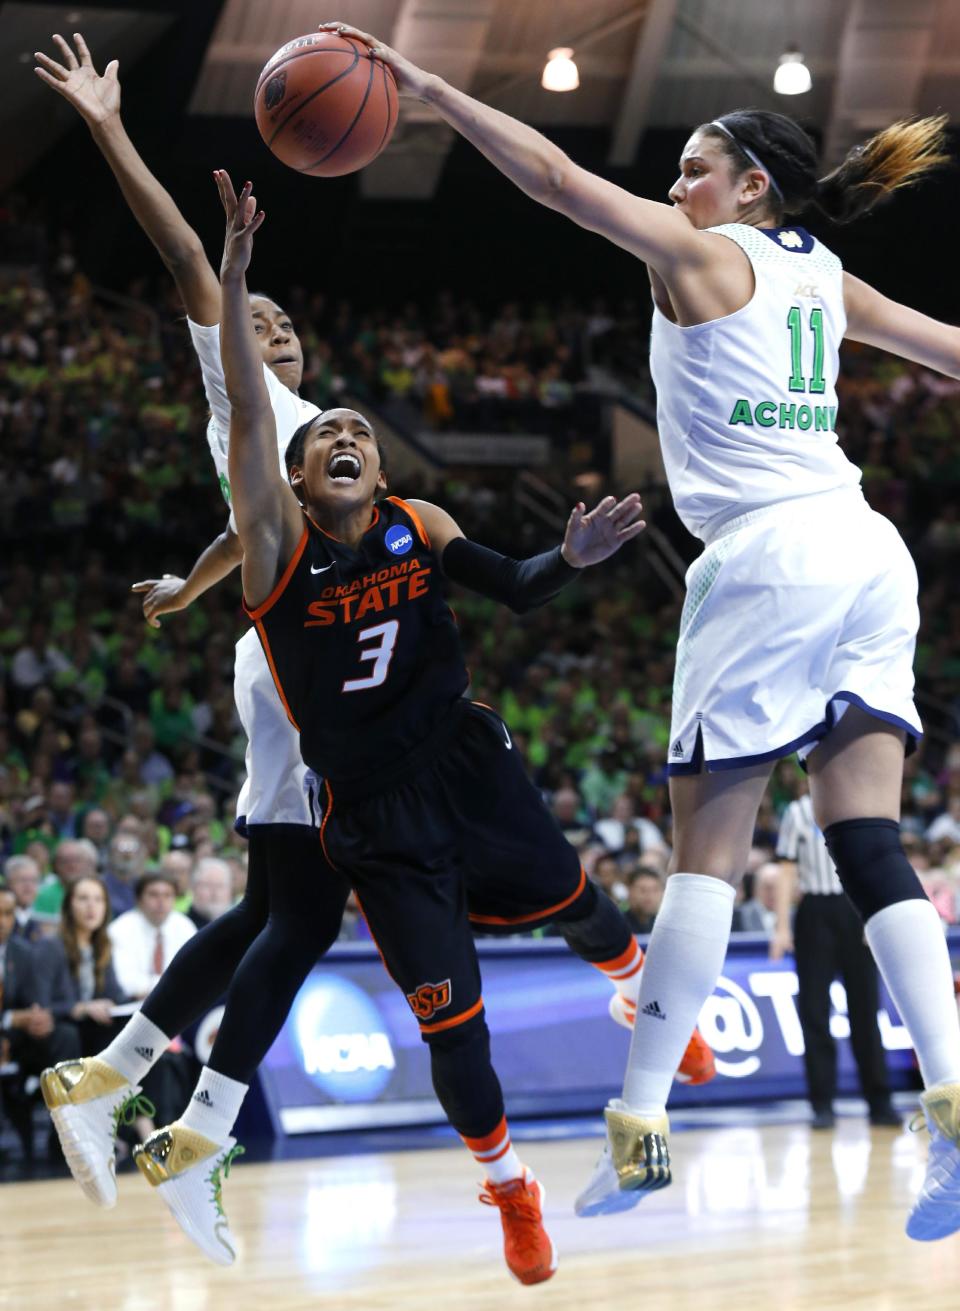 Notre Dame forward Natalie Achonwa (11) blocks a shot by Oklahoma State guard Tiffany Bias (3) as guard Jewell Loyd, at rear, helps to defend during the second half of a regional semifinal in the NCAA college basketball tournament at the Purcell Pavilion in South Bend, Ind., Saturday, March 29, 2014. (AP Photo/Paul Sancya)